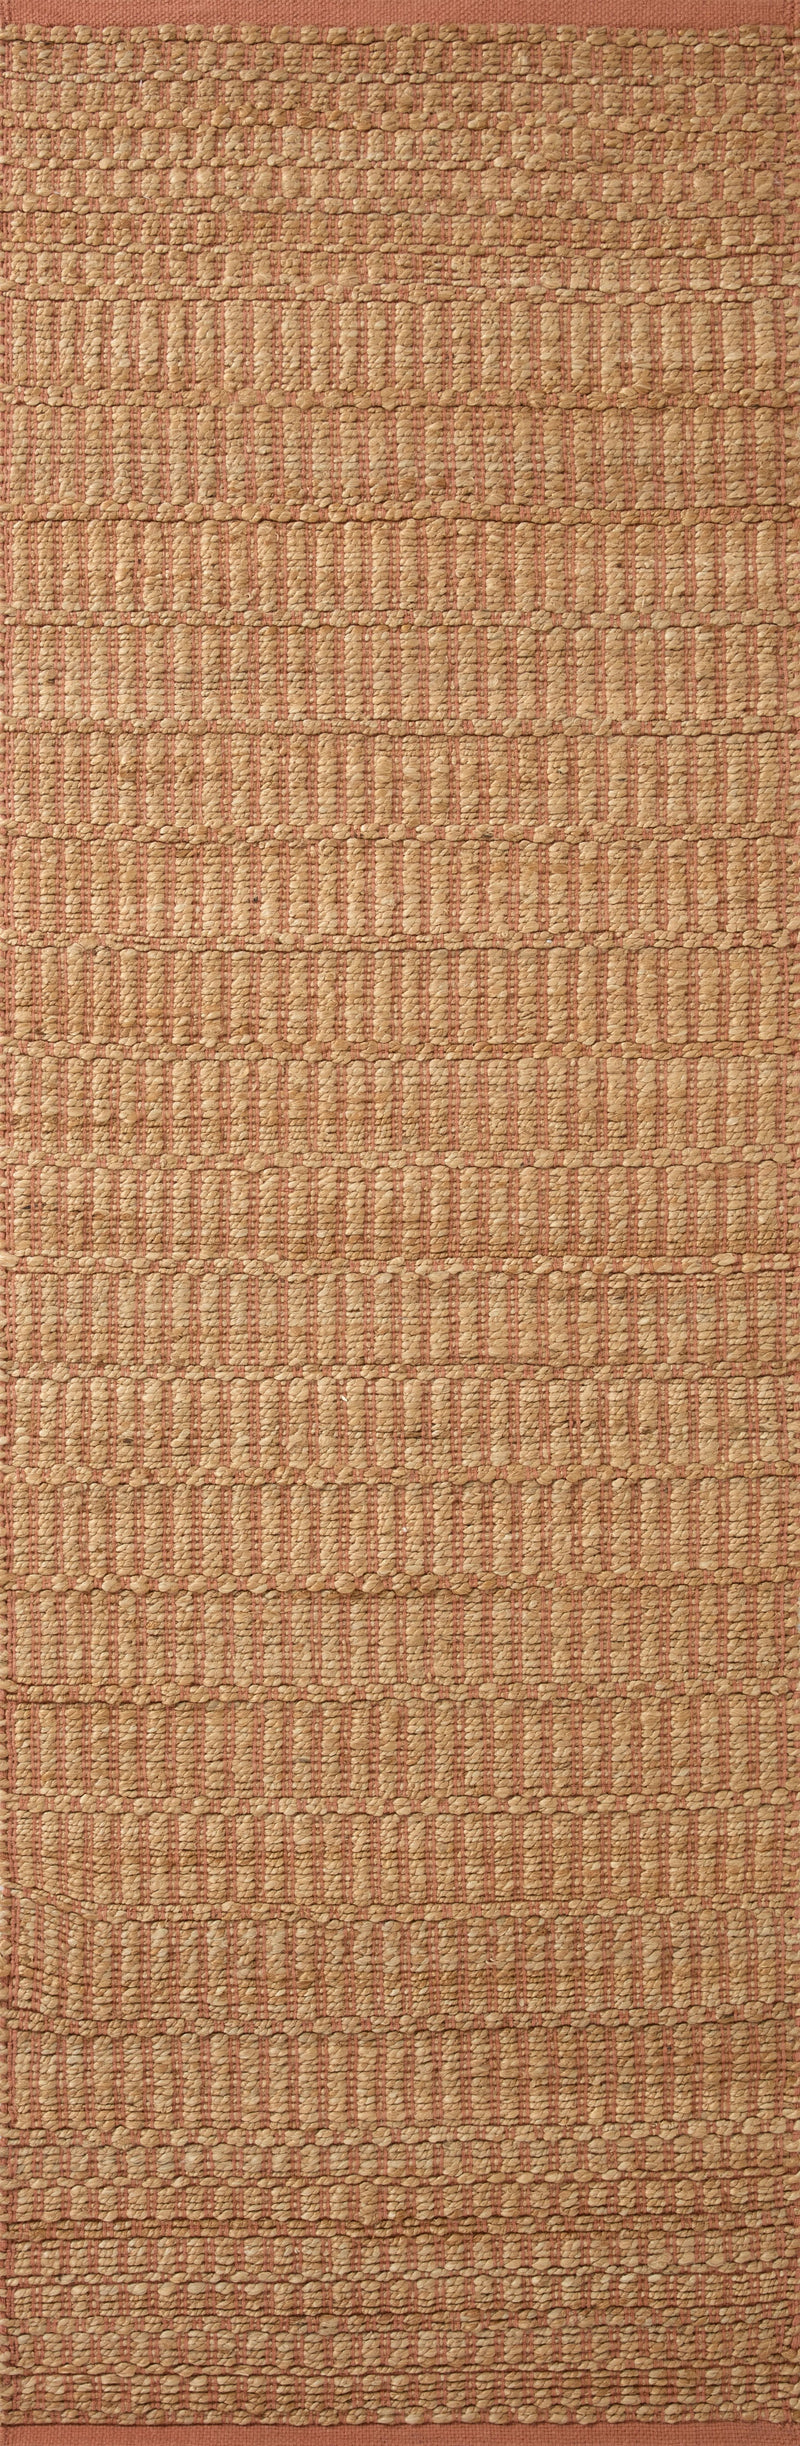 media image for colton hand woven natural clay rug by angela rose x loloi colocon 05nacg2030 2 240